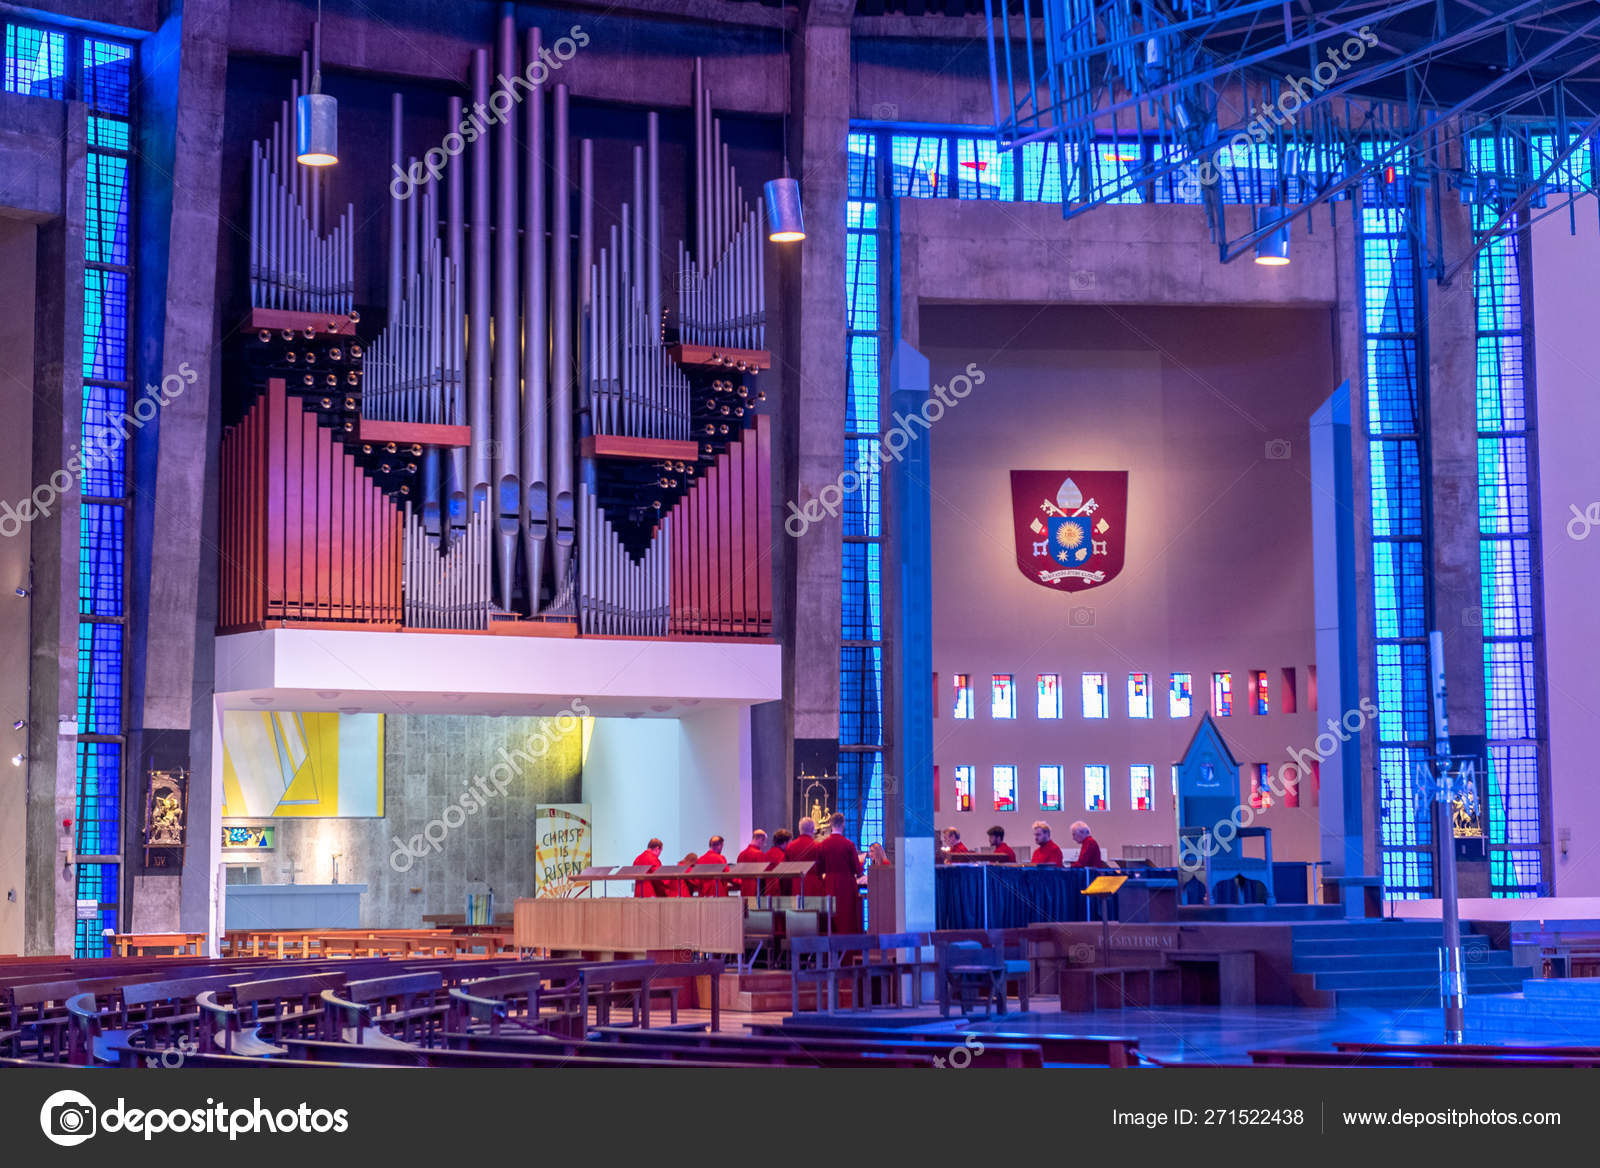 Liverpool Uk 26 May 2019 A View Documenting The Interior Of The Metropolitan Cathedral Of Christ The King In Liverpool Stock Editorial Photo C Ollyh 271522438